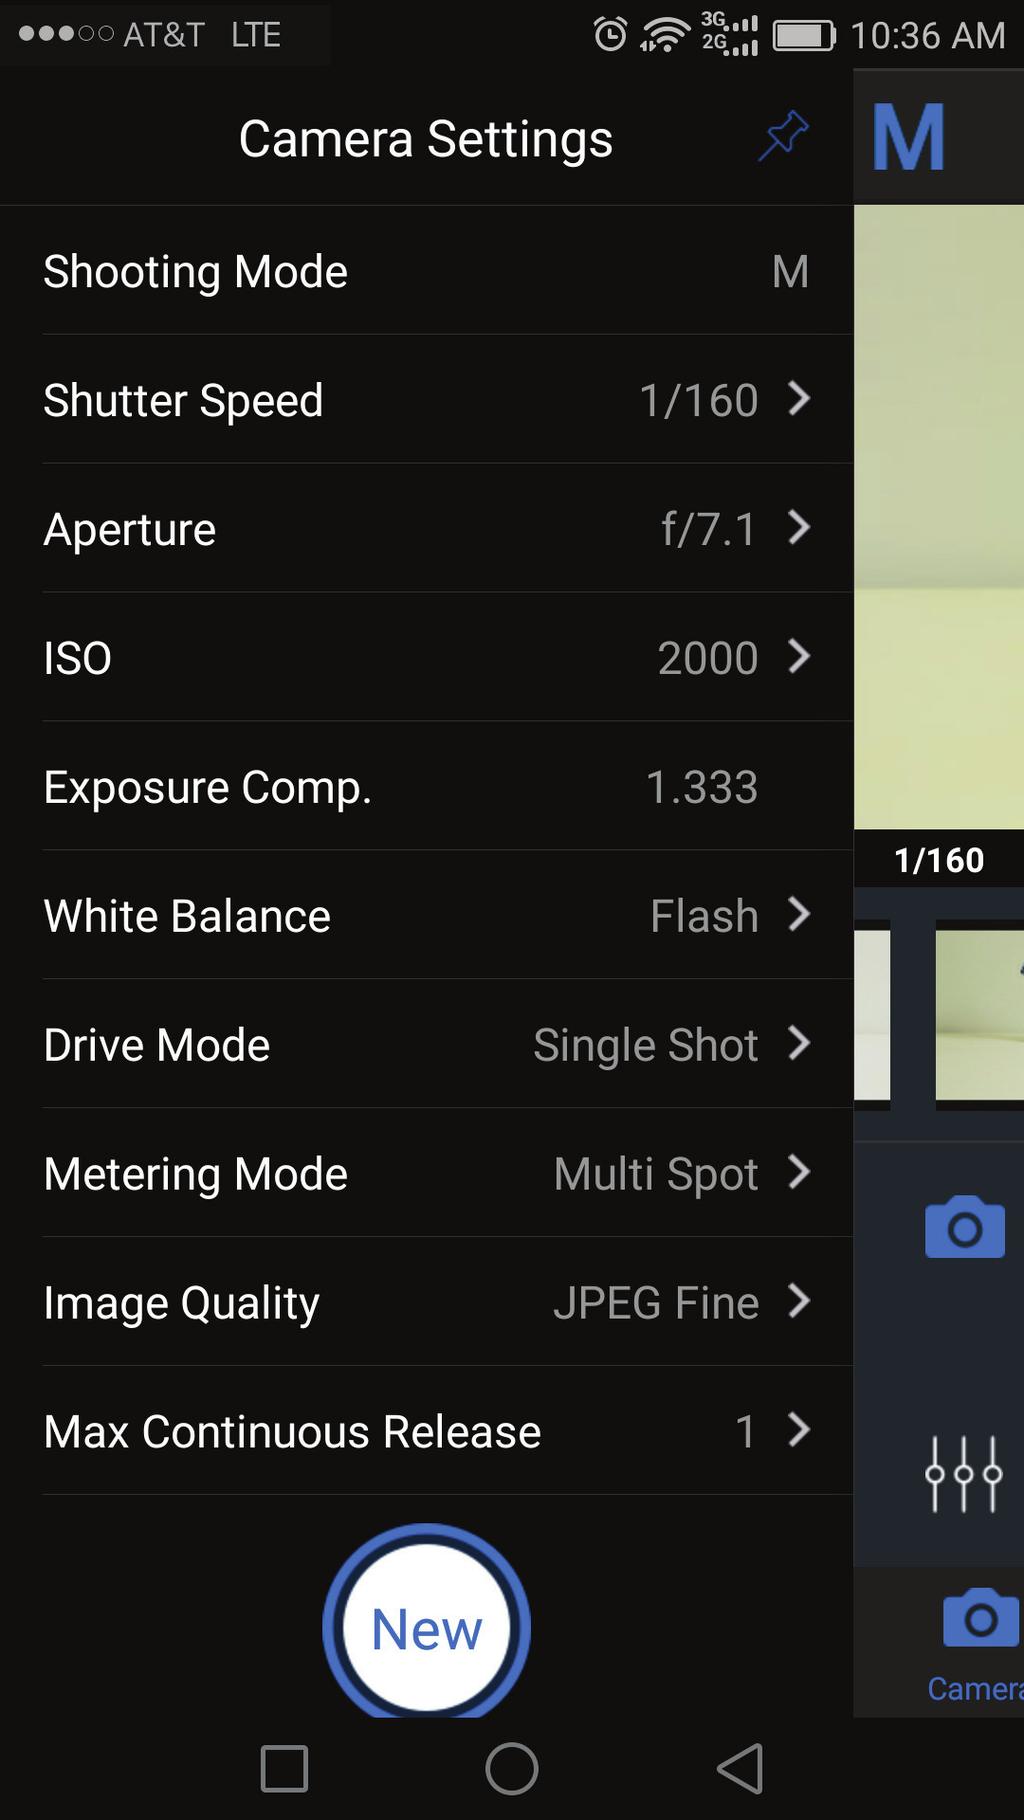 CAPTURE INTERFACE Shooting Mode Camera Model Live View Live View Window CAMERA SETTINGS The Case Remote App allows you to both review the current camera settings as well as adjust them.